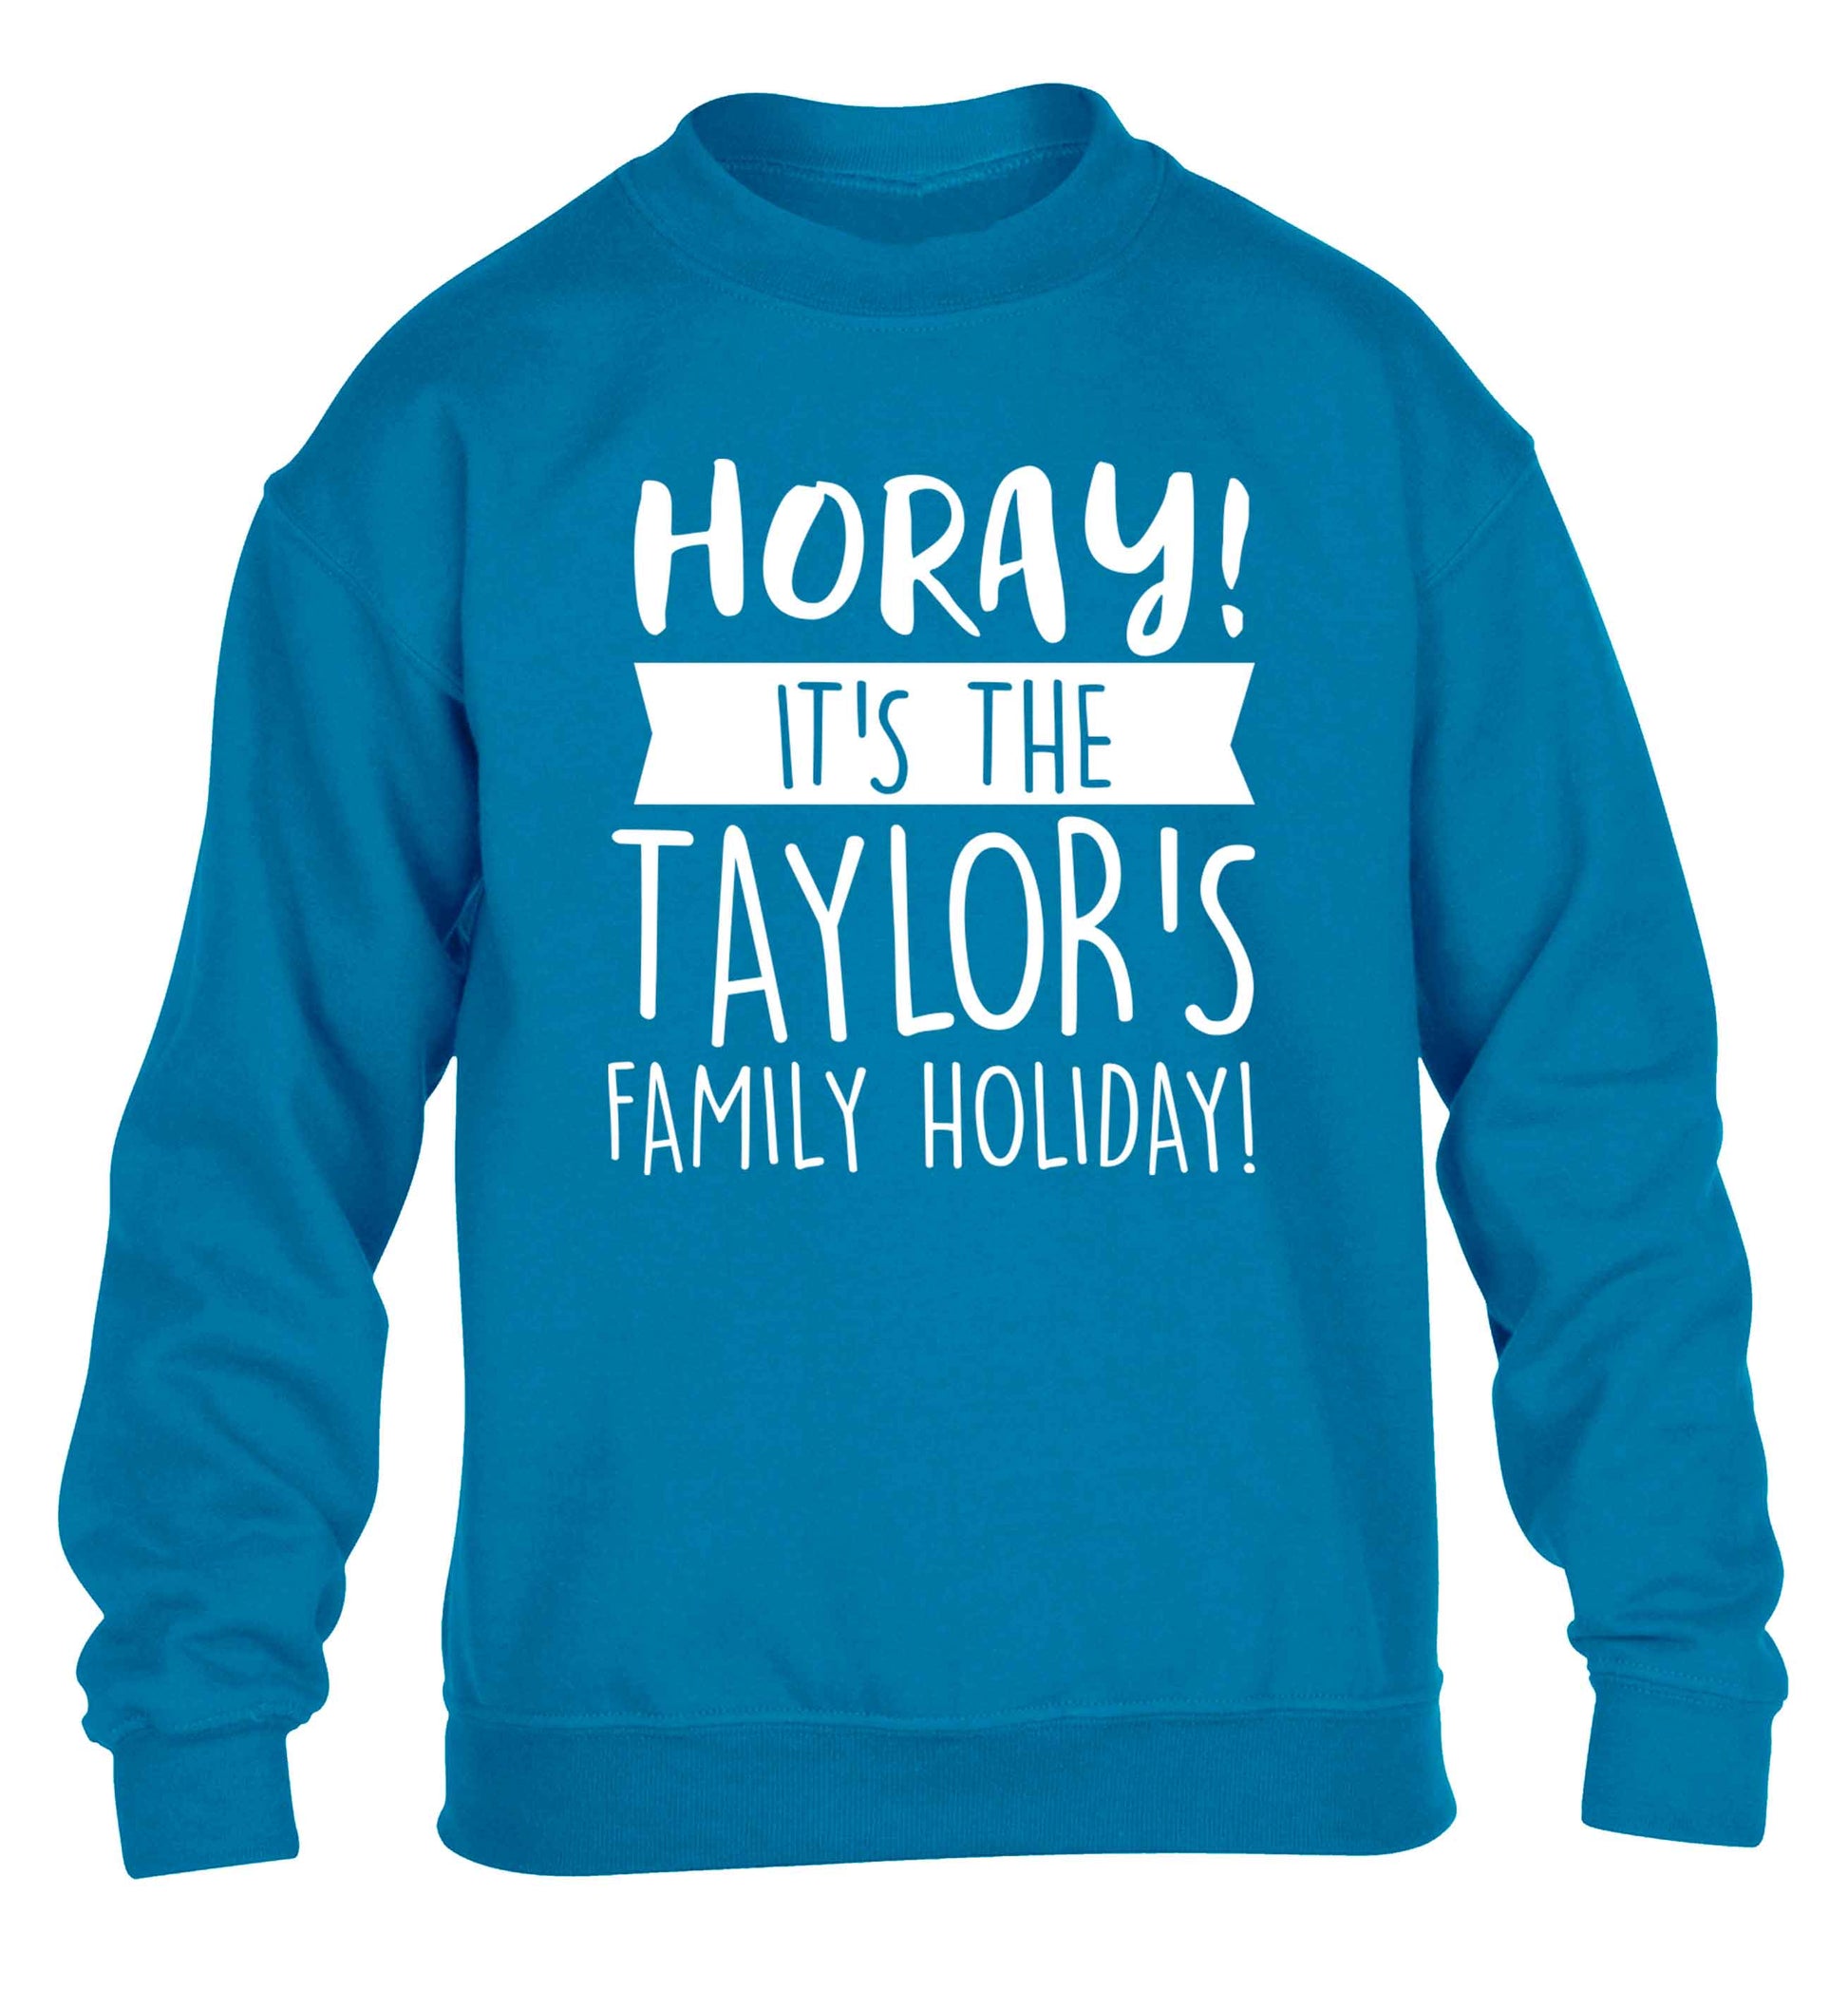 Horay it's the Taylor's family holiday! personalised item children's blue sweater 12-13 Years